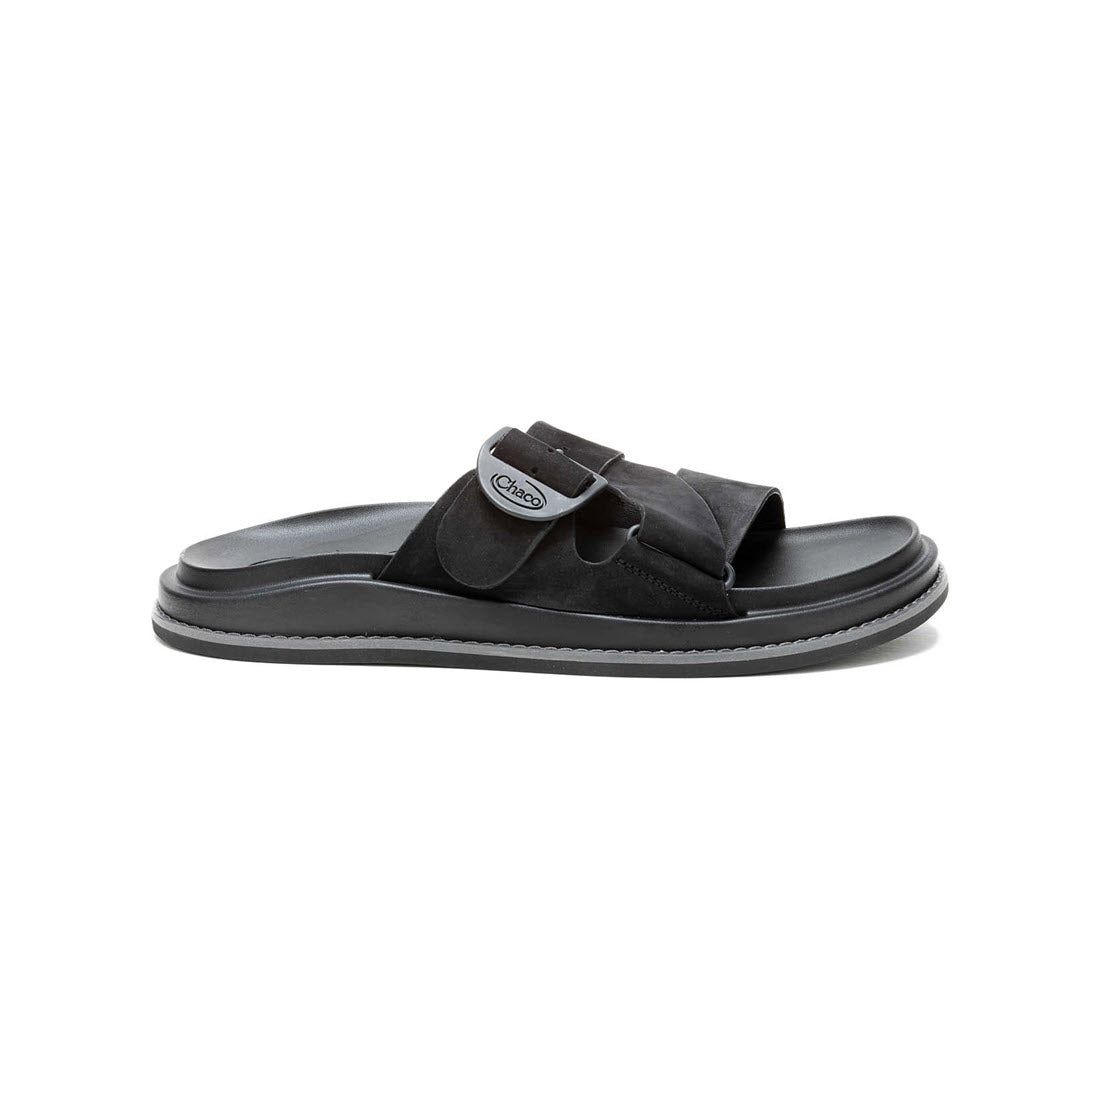 Black Chaco Townes Slide sandal with adjustable strap, displayed against a white background.